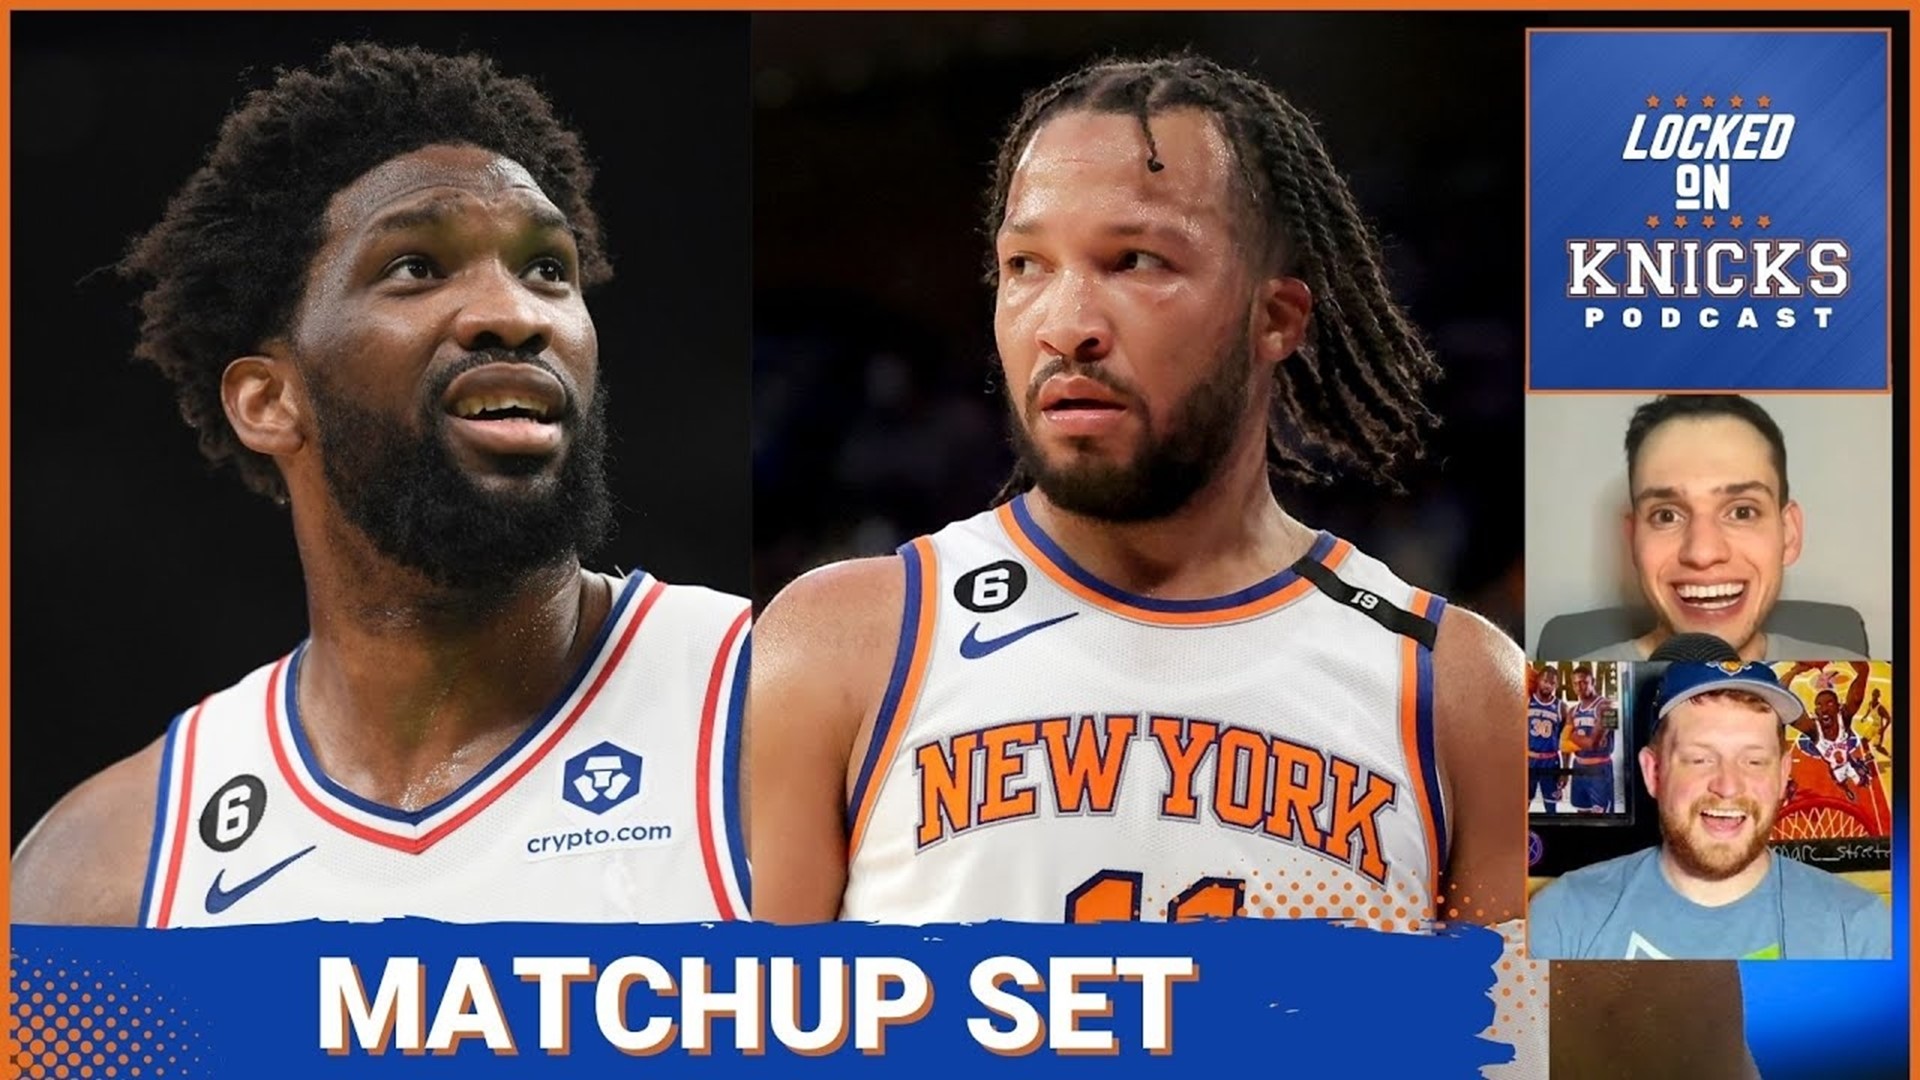 With the Sixers escaping the Heat in an equal parts thrilling and ugly play in game, the Knicks first round matchup is set!